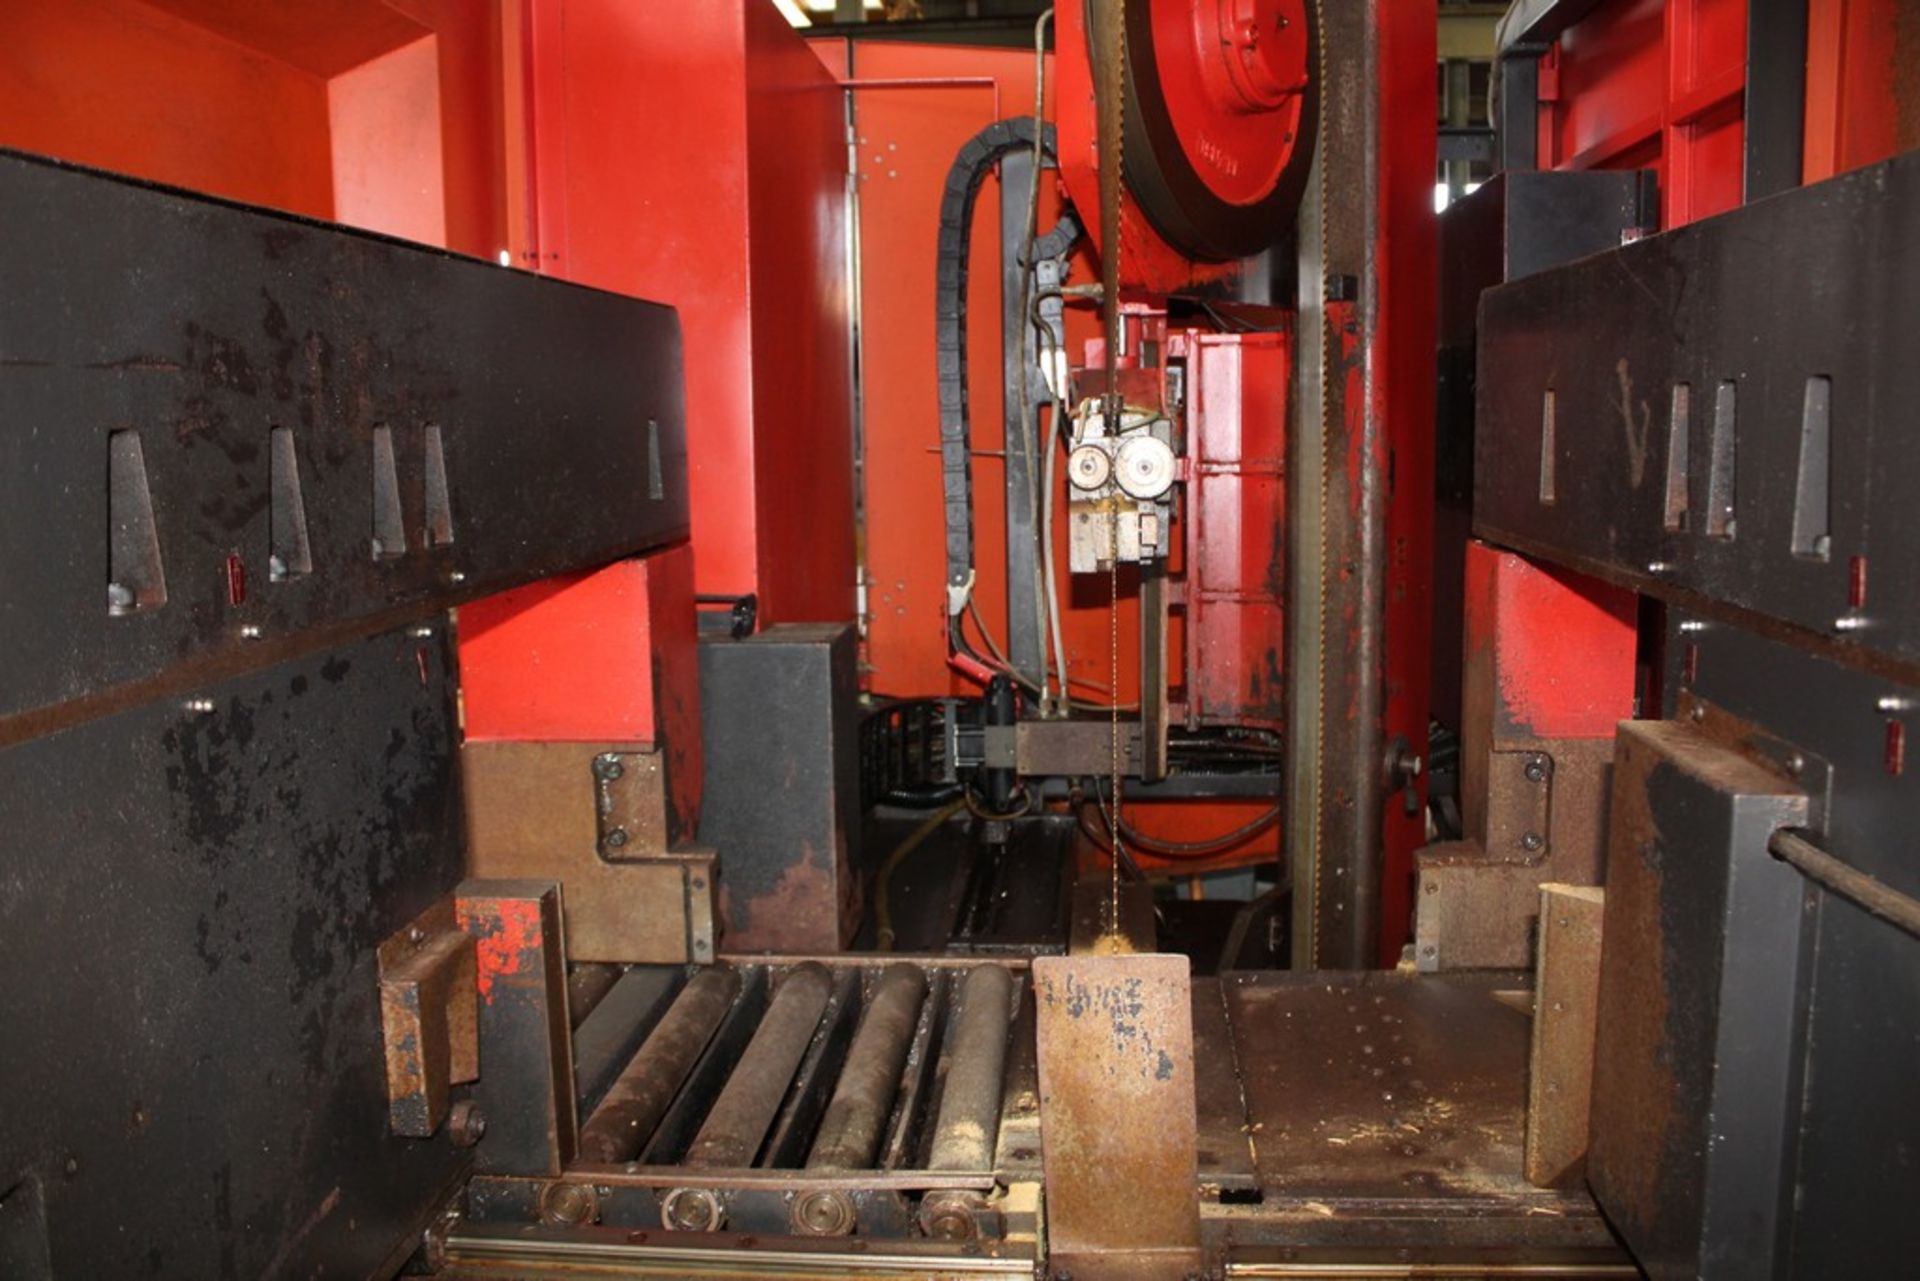 16.9" AMADA CTB400 CNC VERTICAL CARBIDE BAND SAW, S/N 40850029 (1998), 1.18" TO 16.9", CUTTING - Image 2 of 5